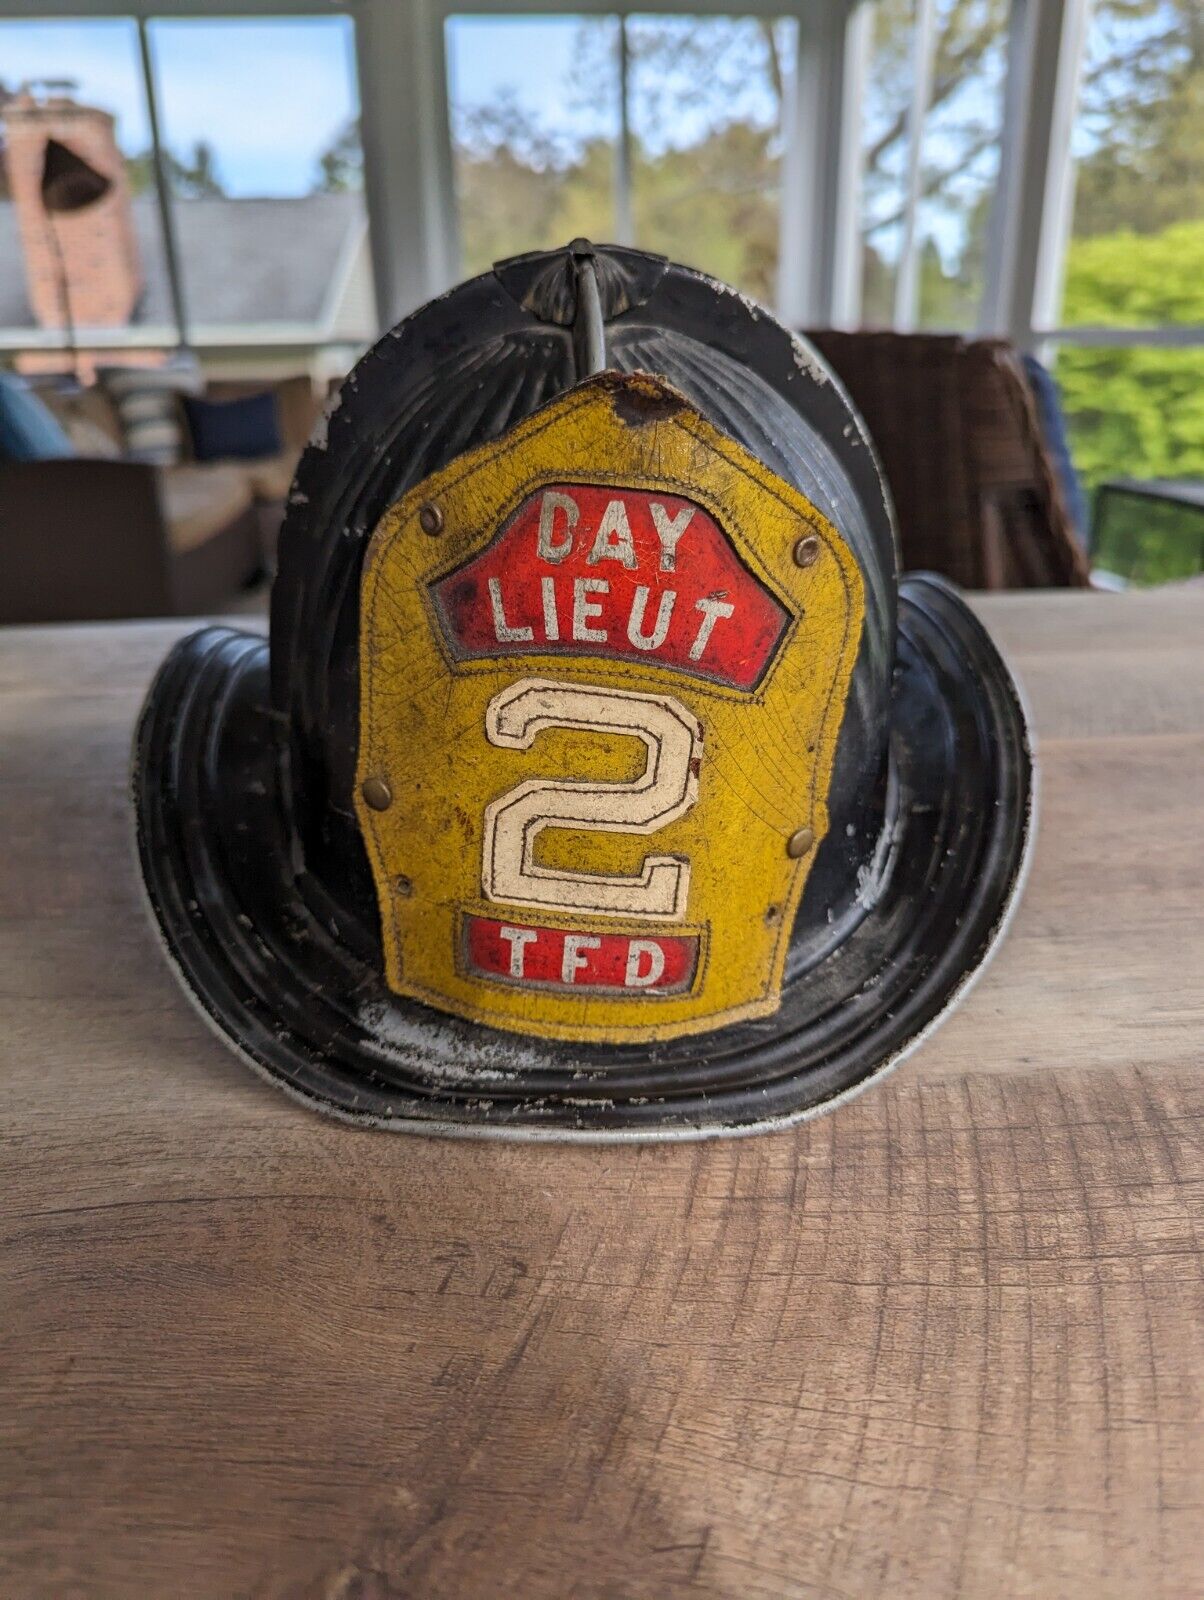 Vintage Cairns and Brothers Firemans Helmet (Day Lieut 2 TFD) 